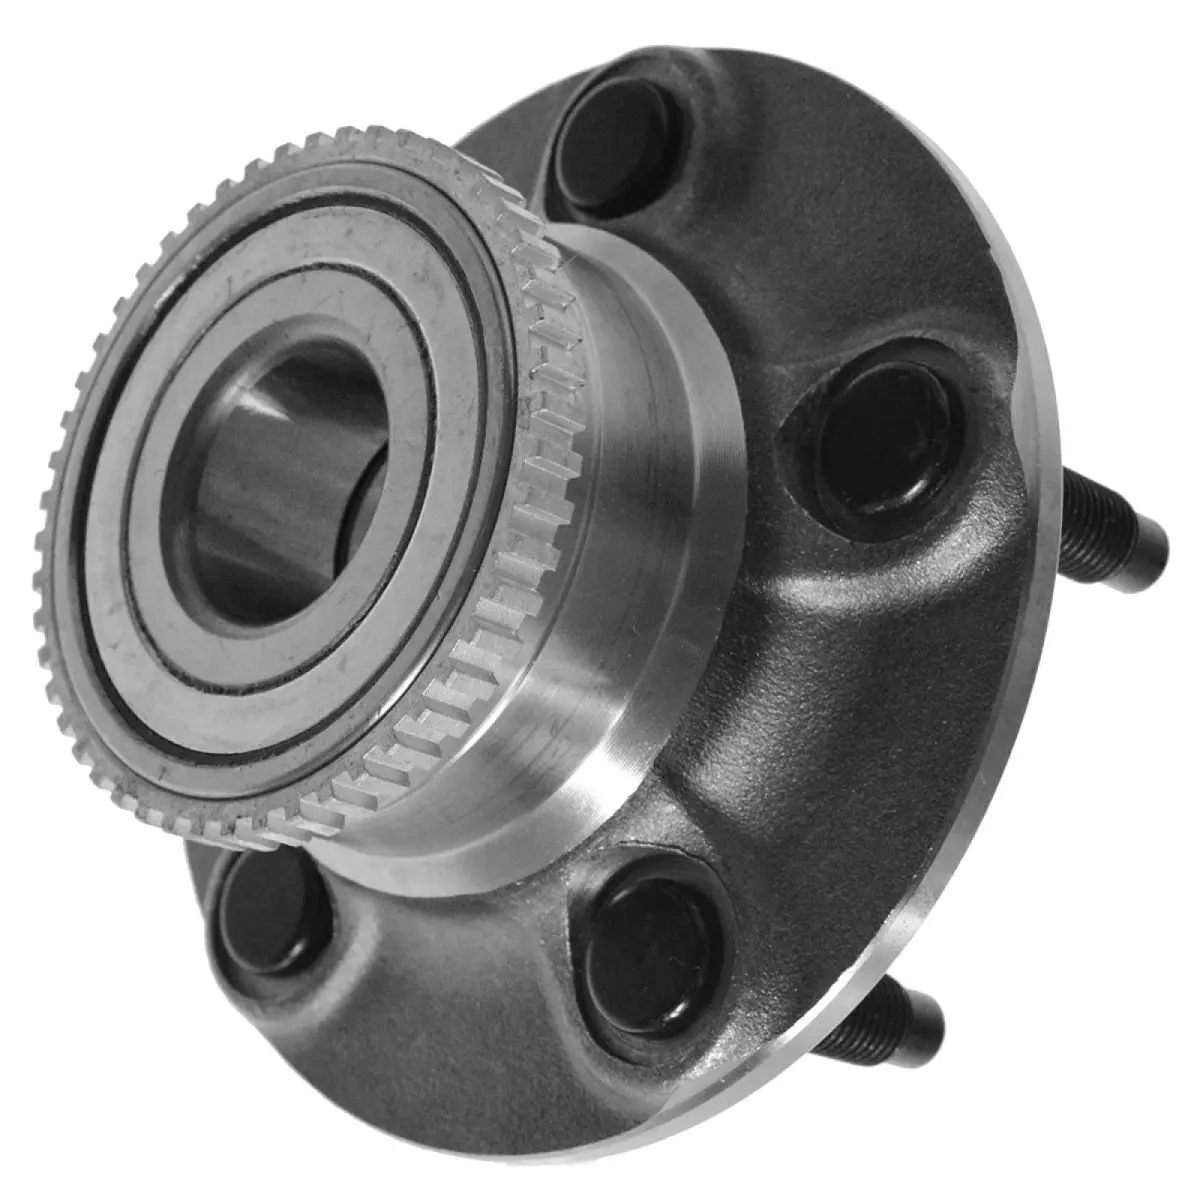 

Rear Wheel Hub & Bearing Left or Right for Ford Taurus Mercury Sable